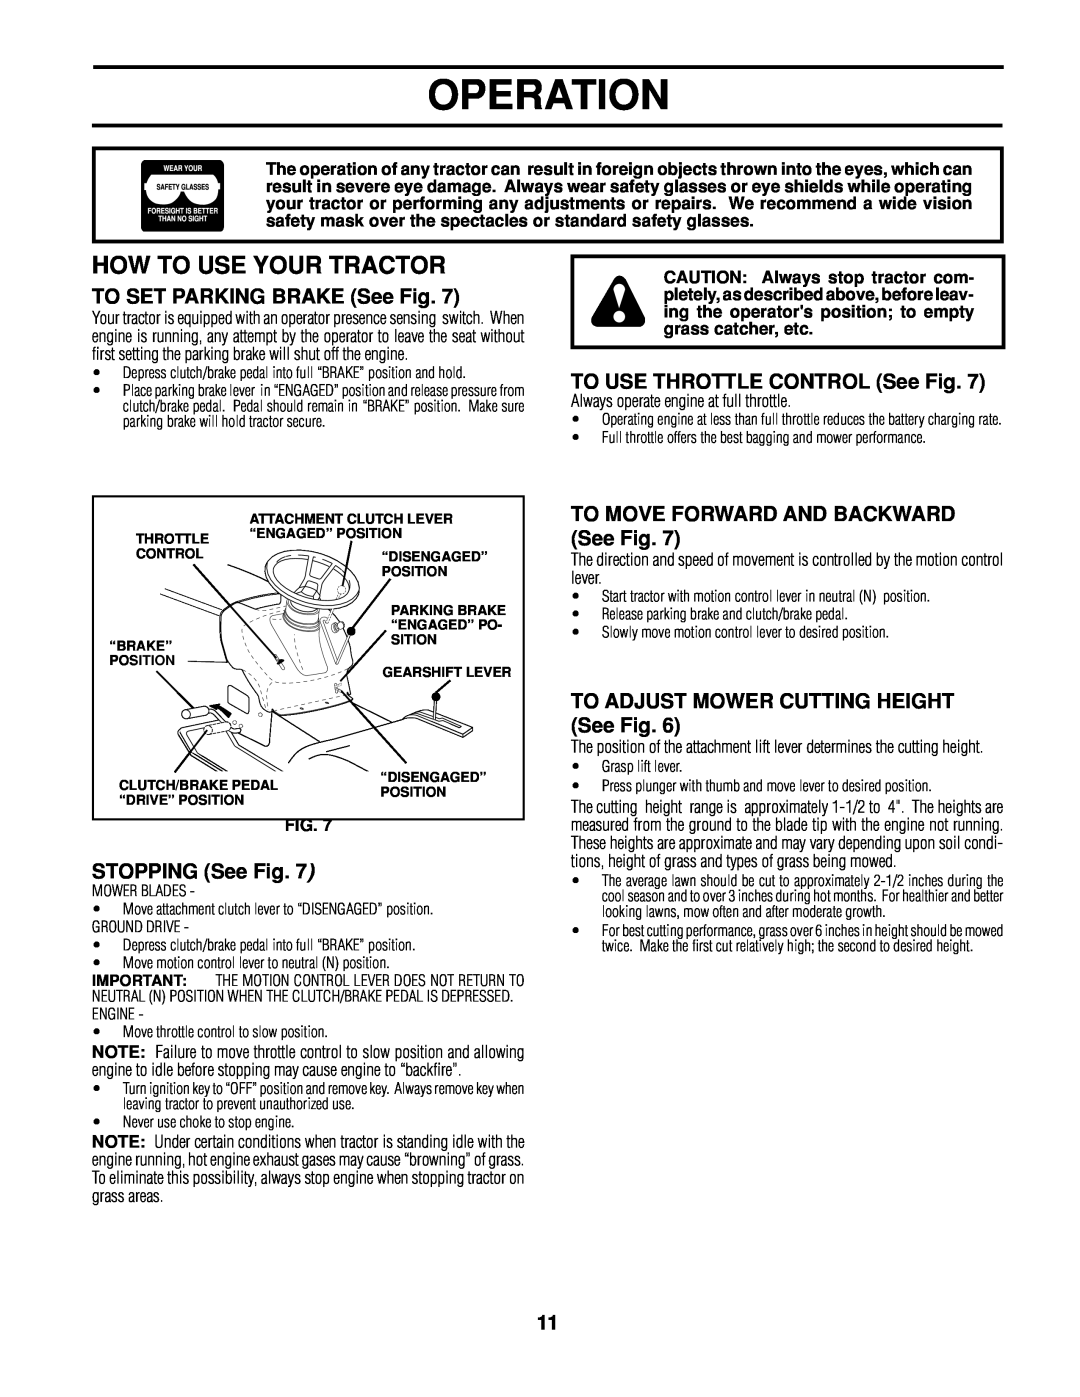 Poulan 161608 owner manual How To Use Your Tractor, Operation, TO SET PARKING BRAKE See Fig, STOPPING See Fig 